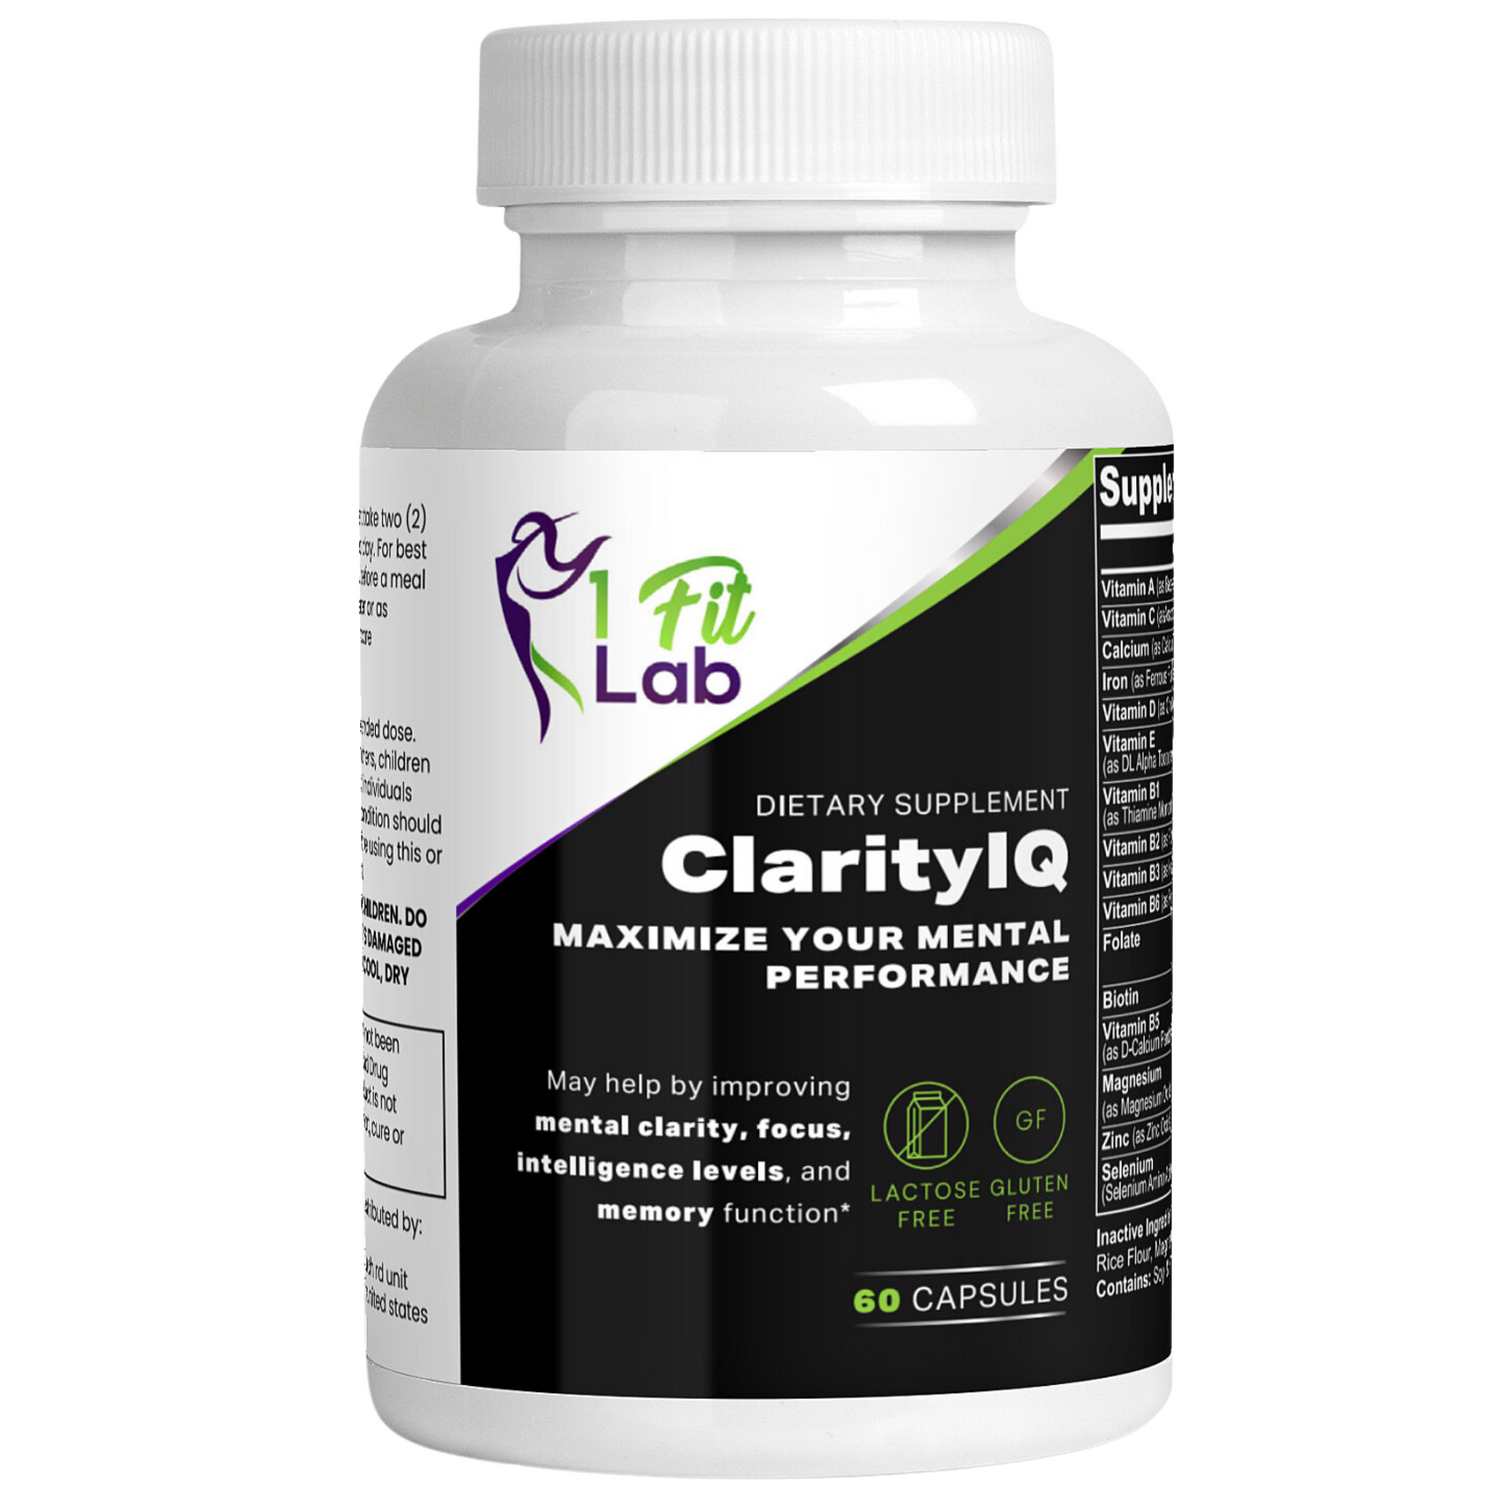 Bottle of ClarityIQ Natural Brain Booster with Bacopa, Ginkgo, and Rhodiola for focus, memory, and energy